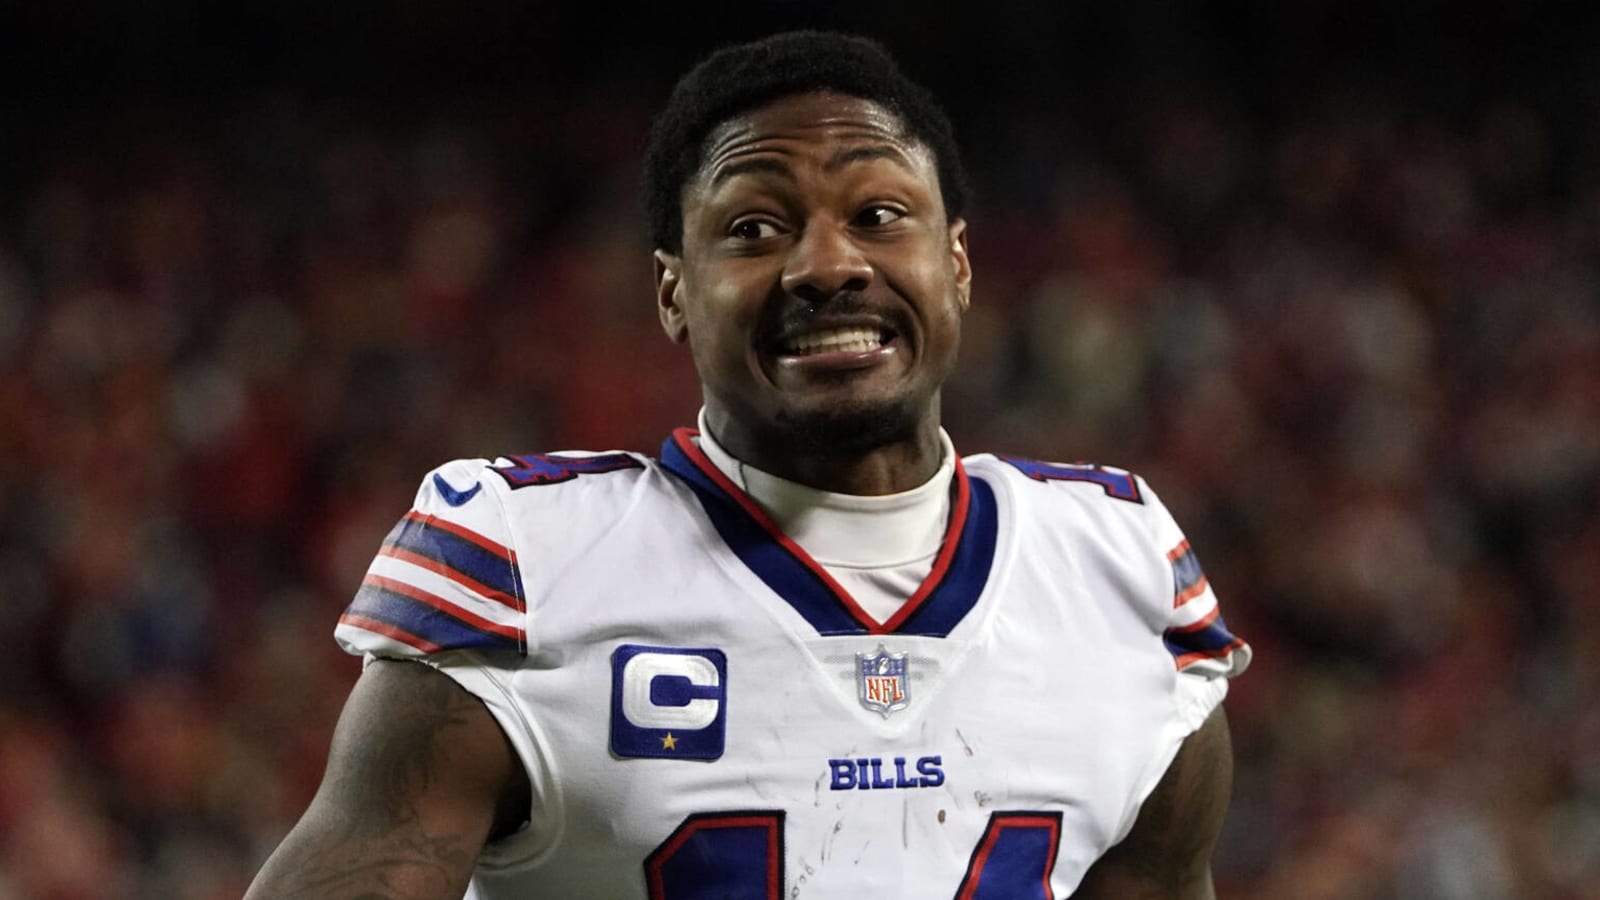 Bills GM: I don't see Stefon Diggs' contract being an issue